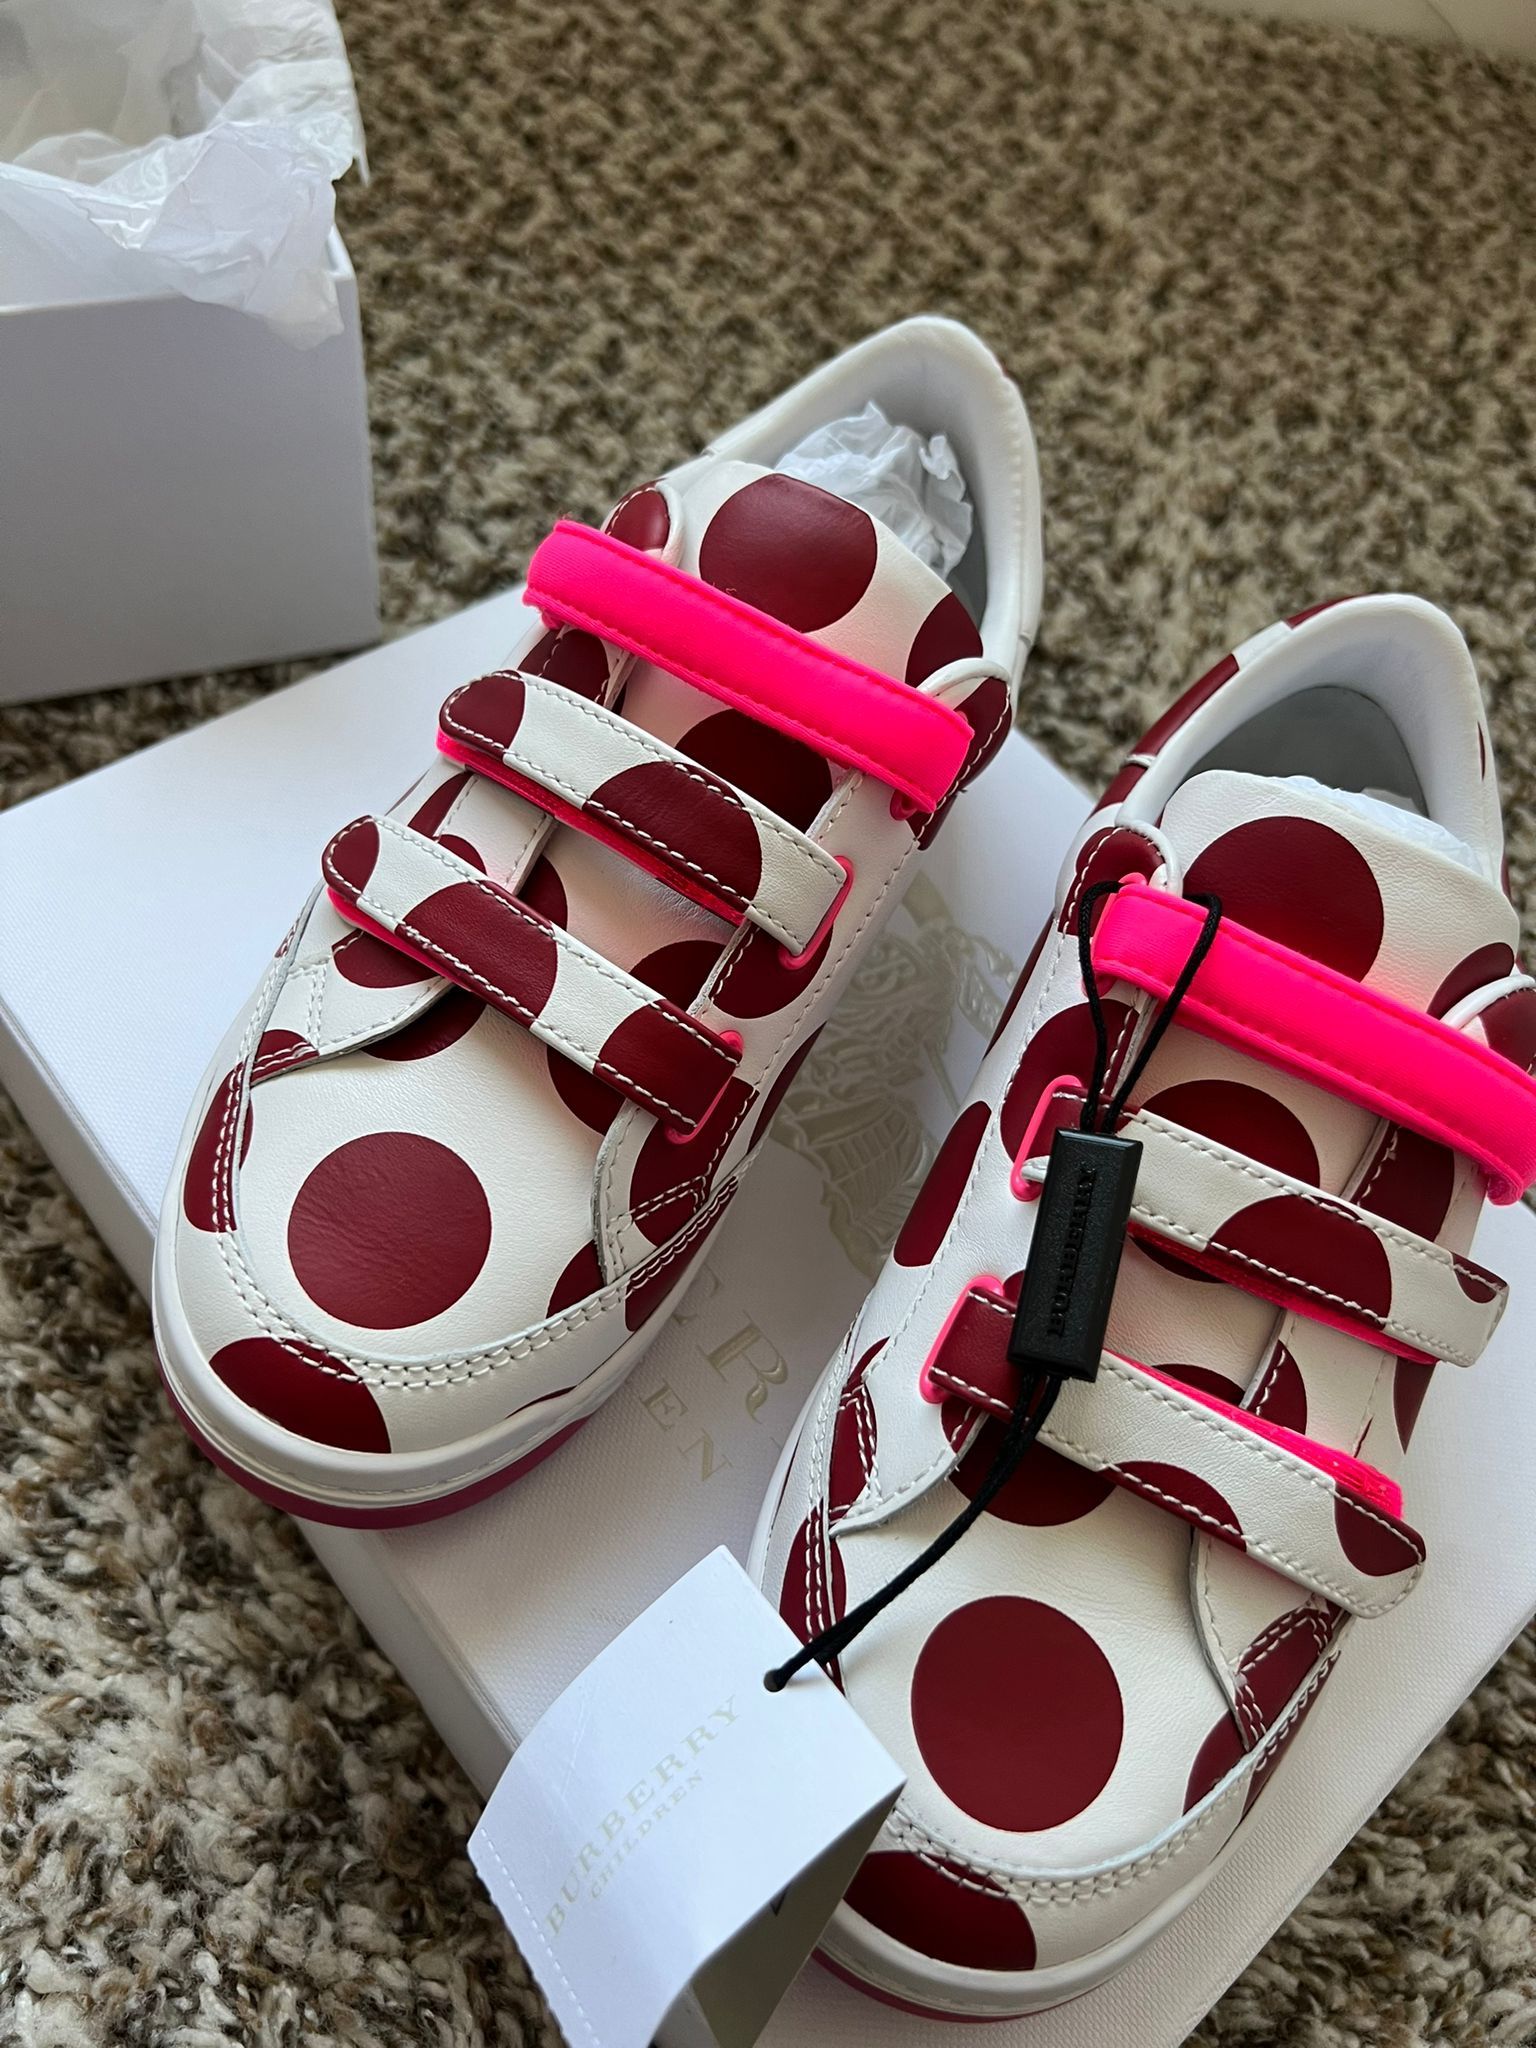 BRAND NEW BURBERRY KIDS SNEAKERS SIZE 32 And 33 -$125 Each 